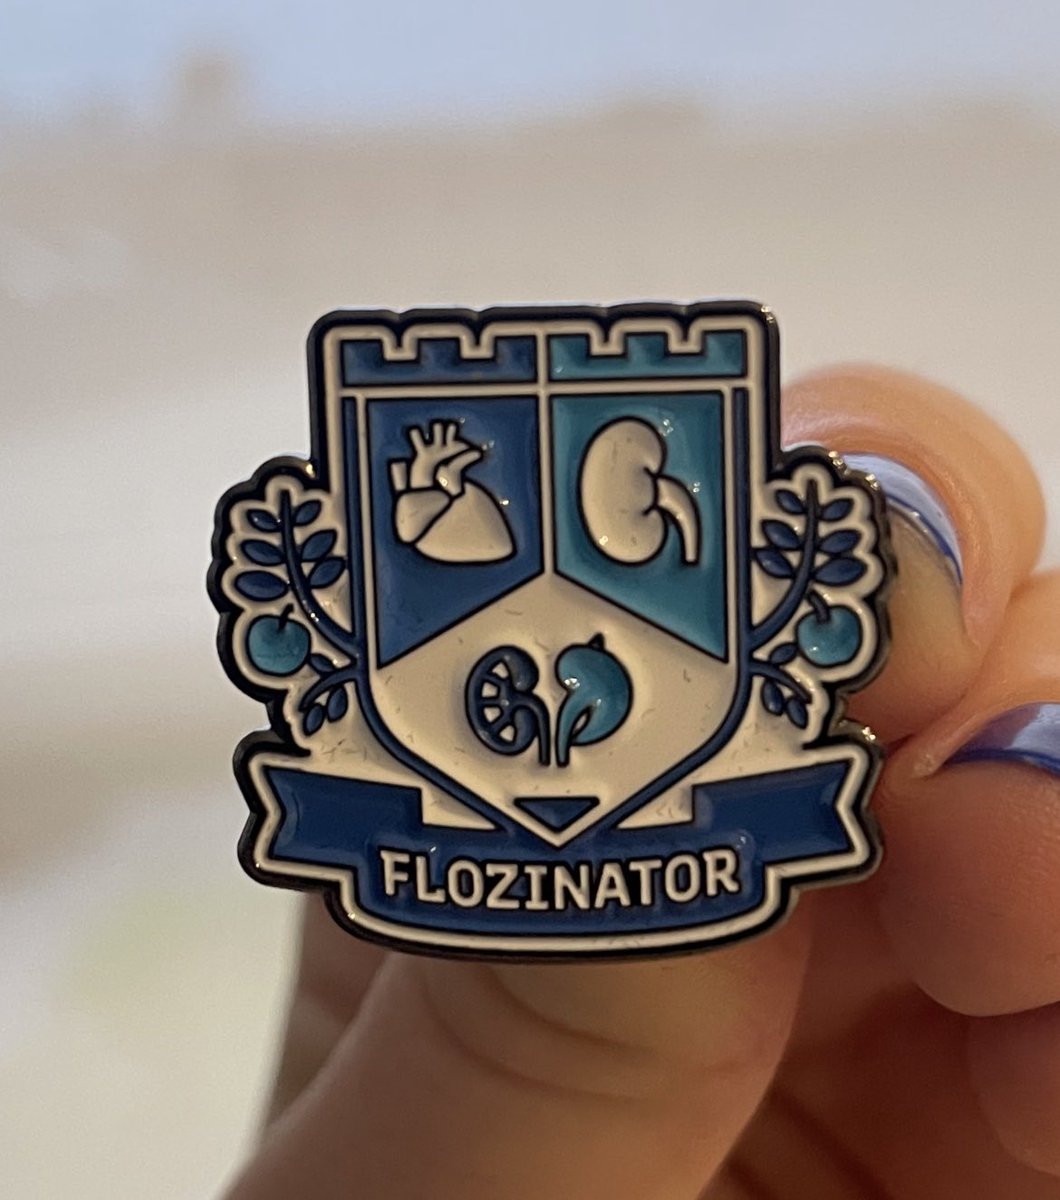 It’s here and it’s perfect. I am officially a #flozinator